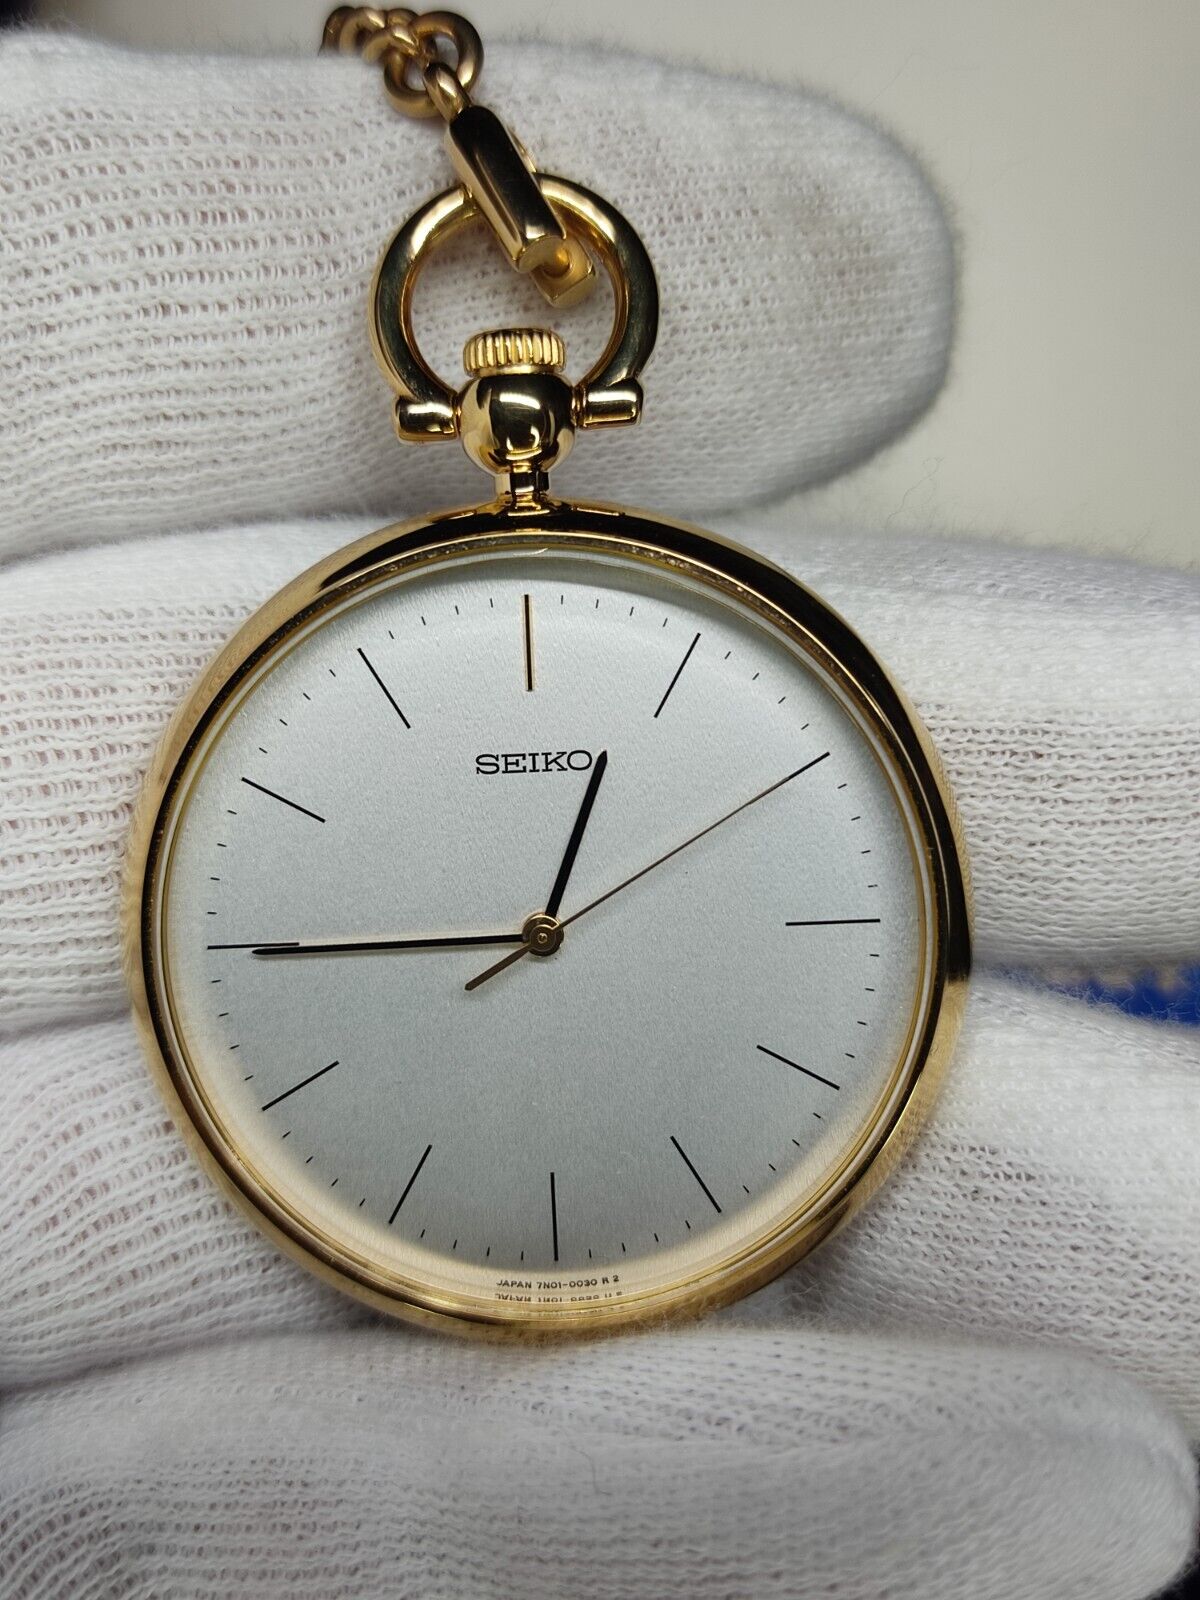 Excellent condition rare Seiko pocket watch vintage battery replaced From Japan